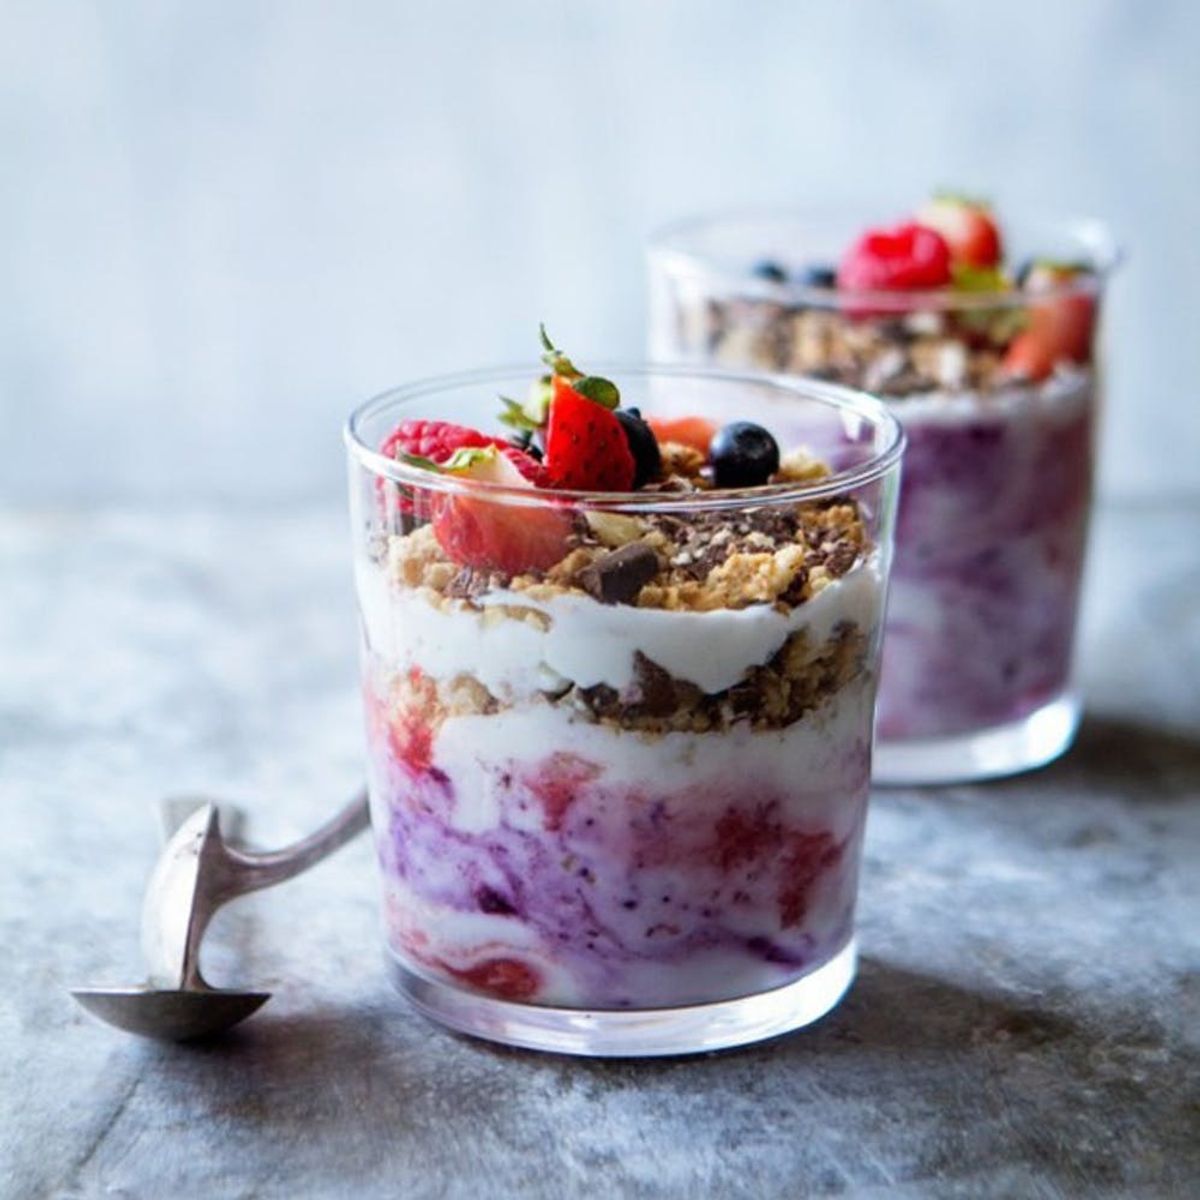 19 Layered Parfaits You’ll Want to Instagram ASAP